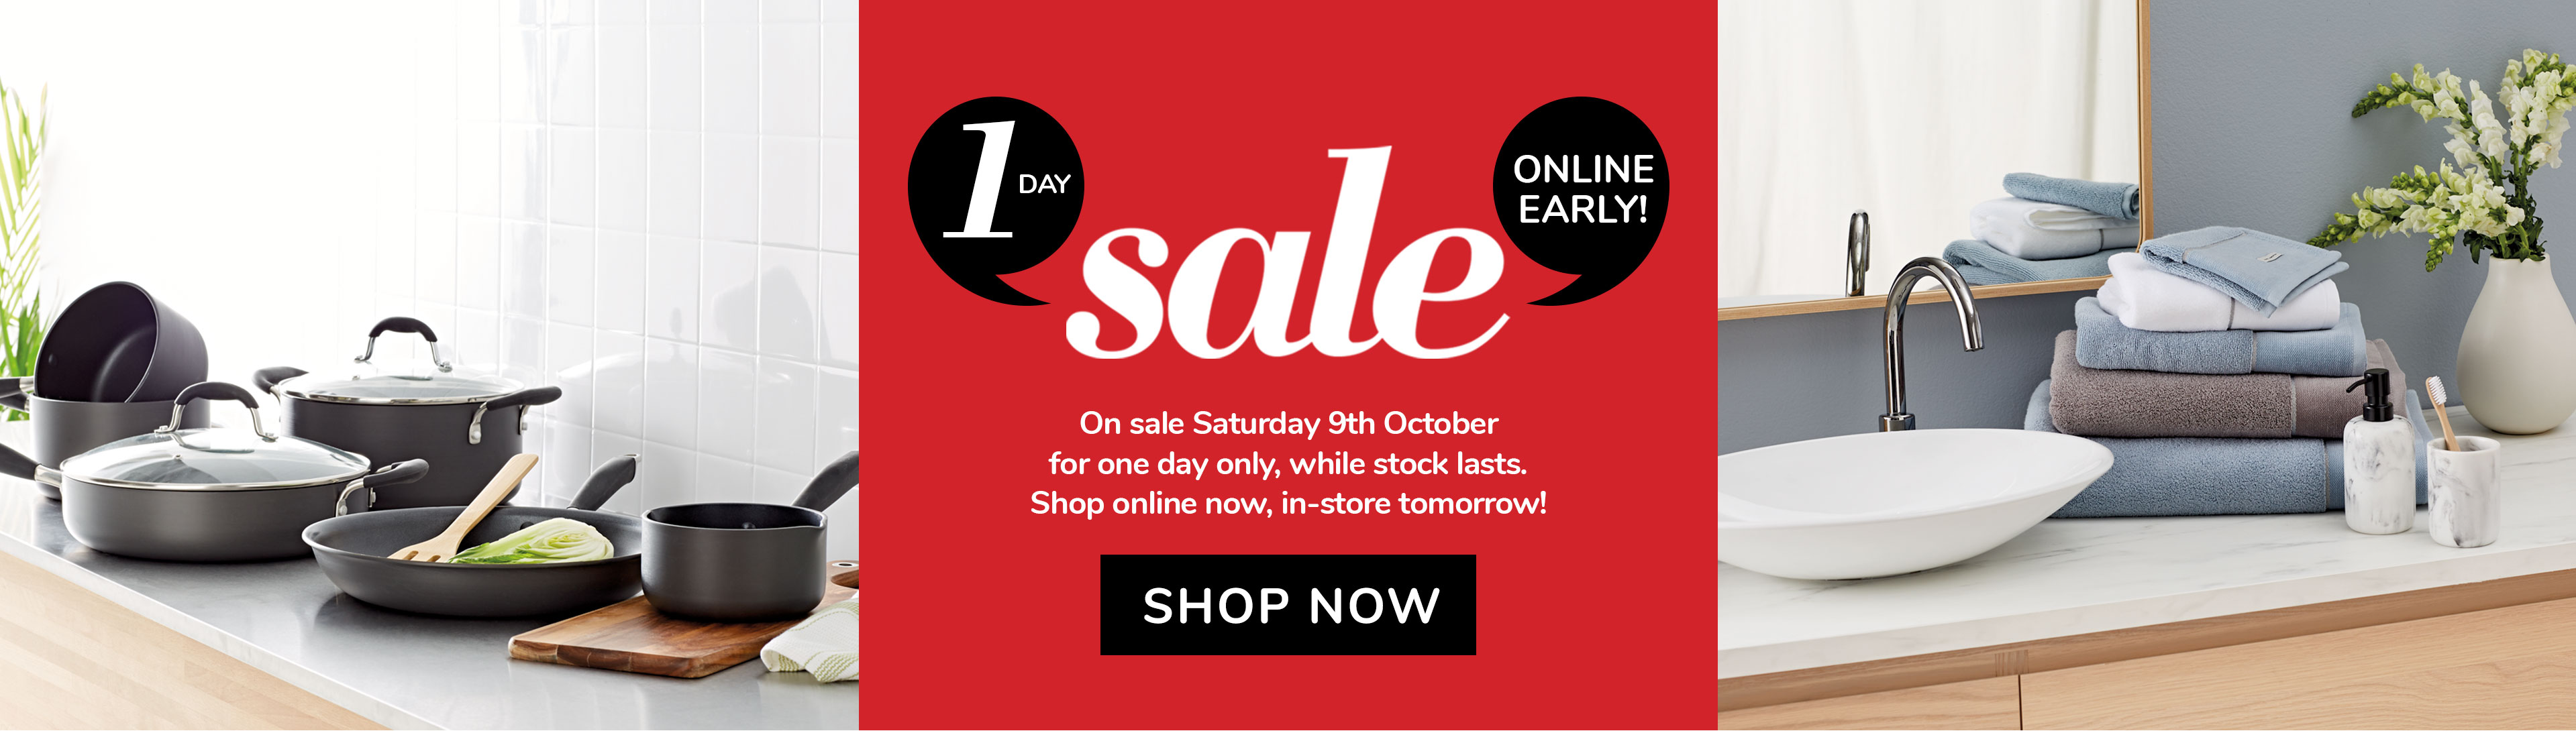 Harris Scarfe 1 Day sale up to 40% OFF on homeware, clothing & electrical. Online early